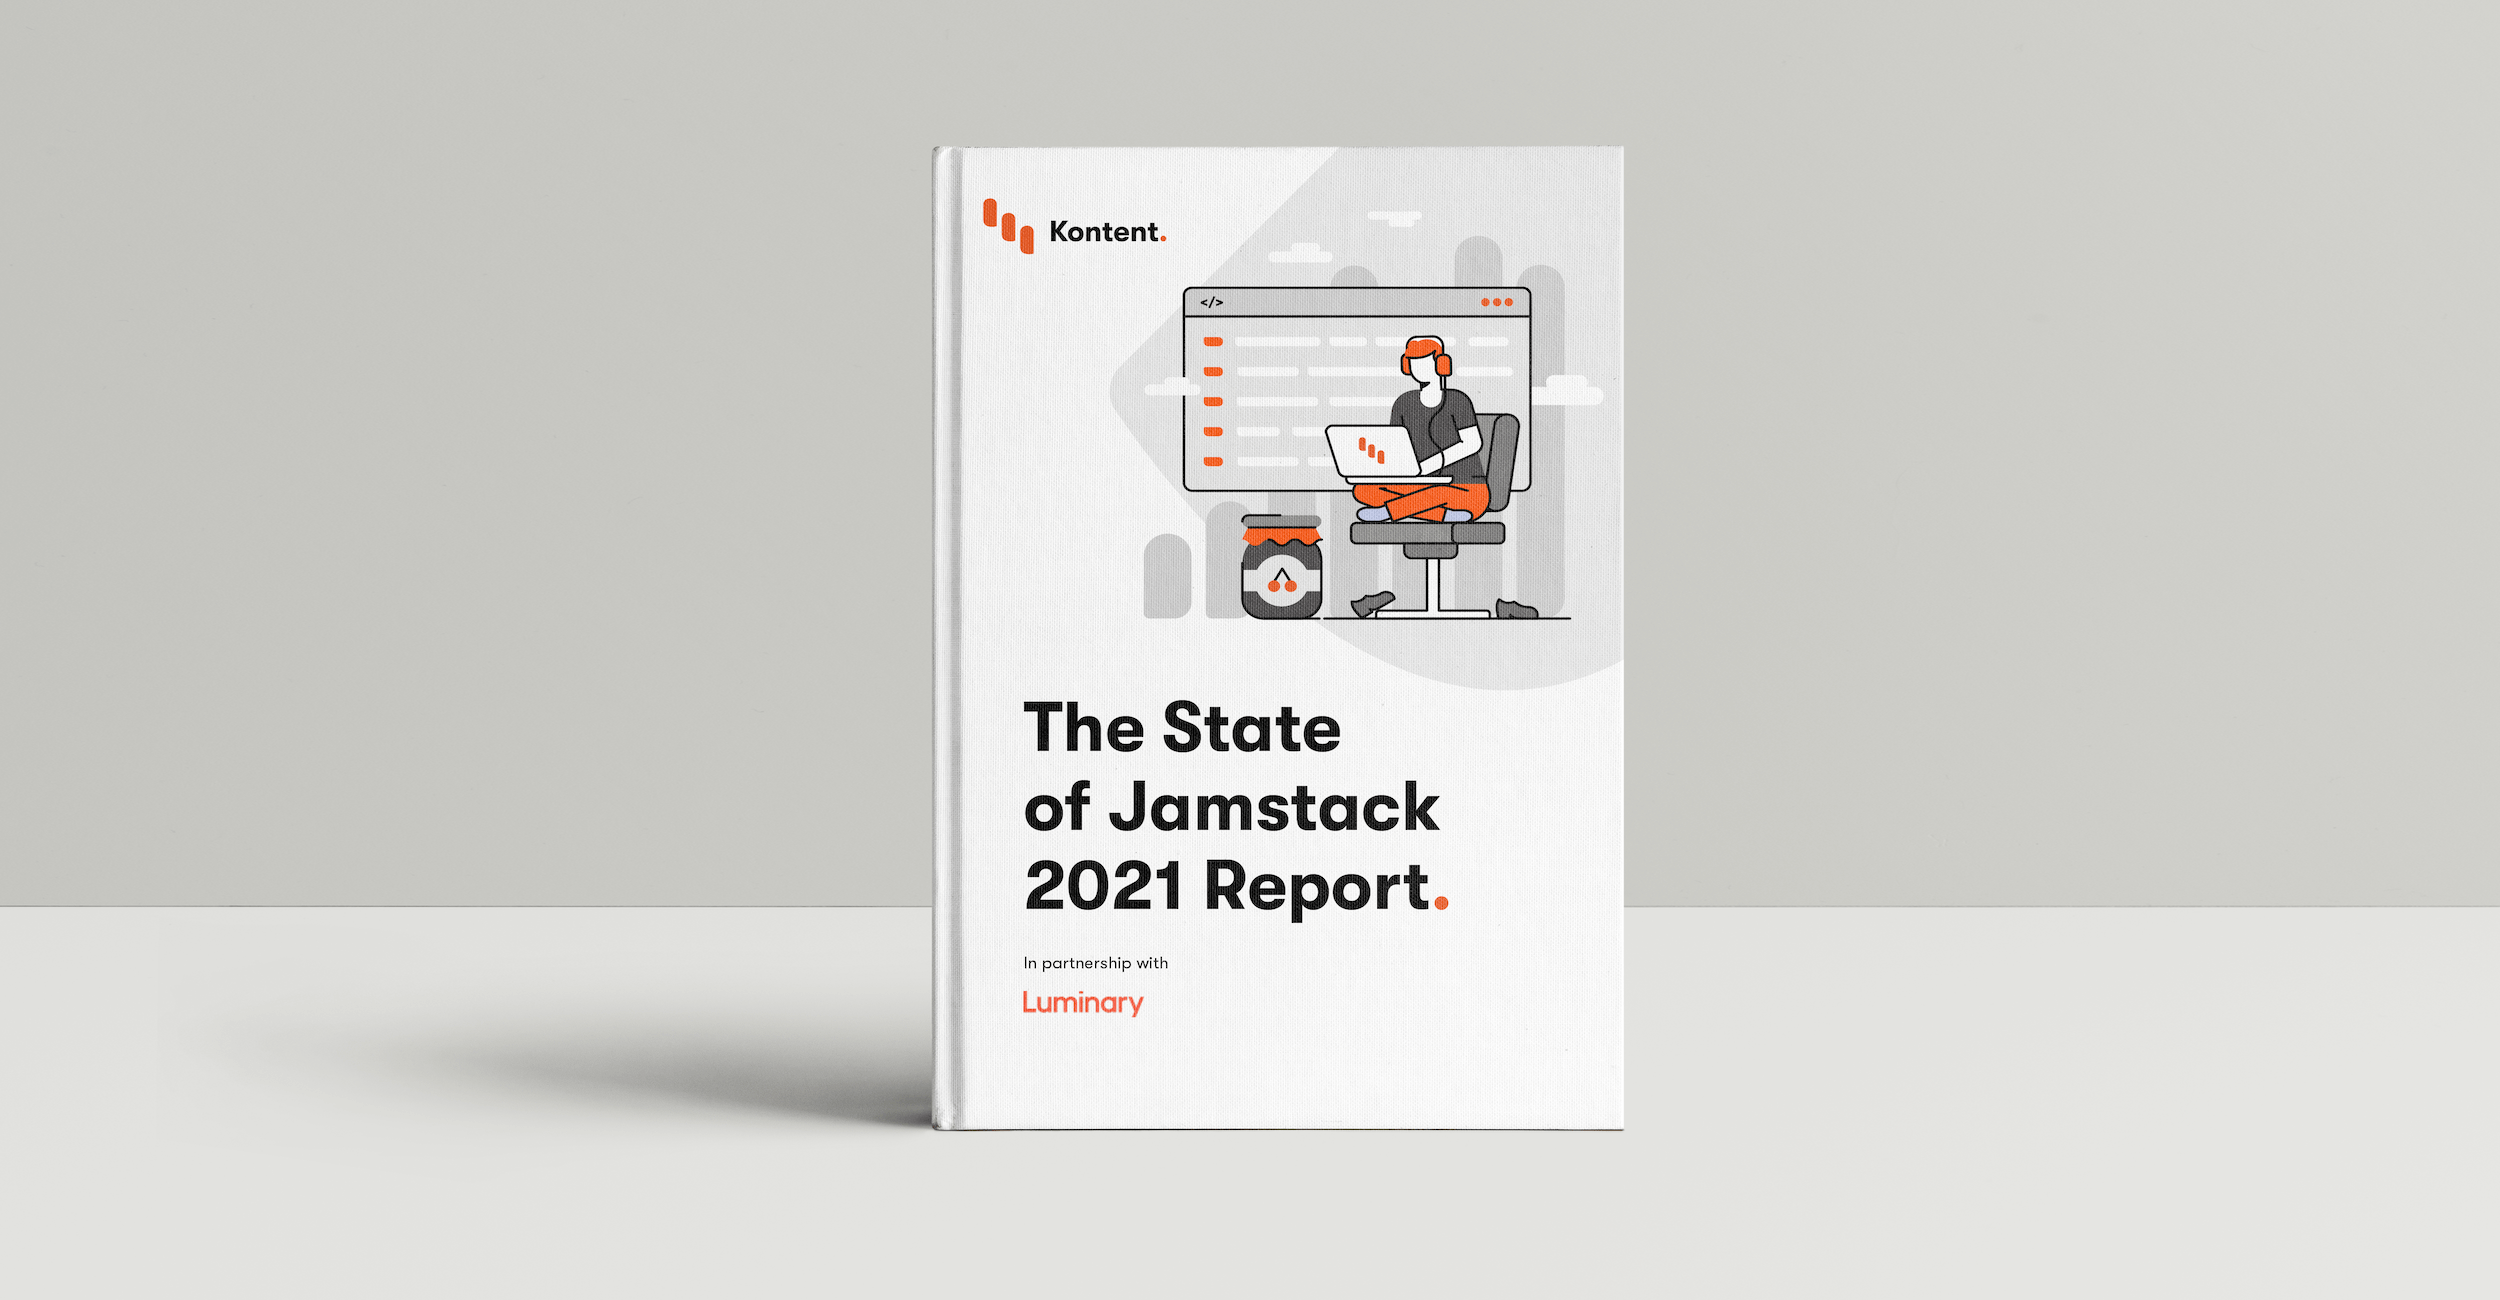 State of Jamstack Report 2021